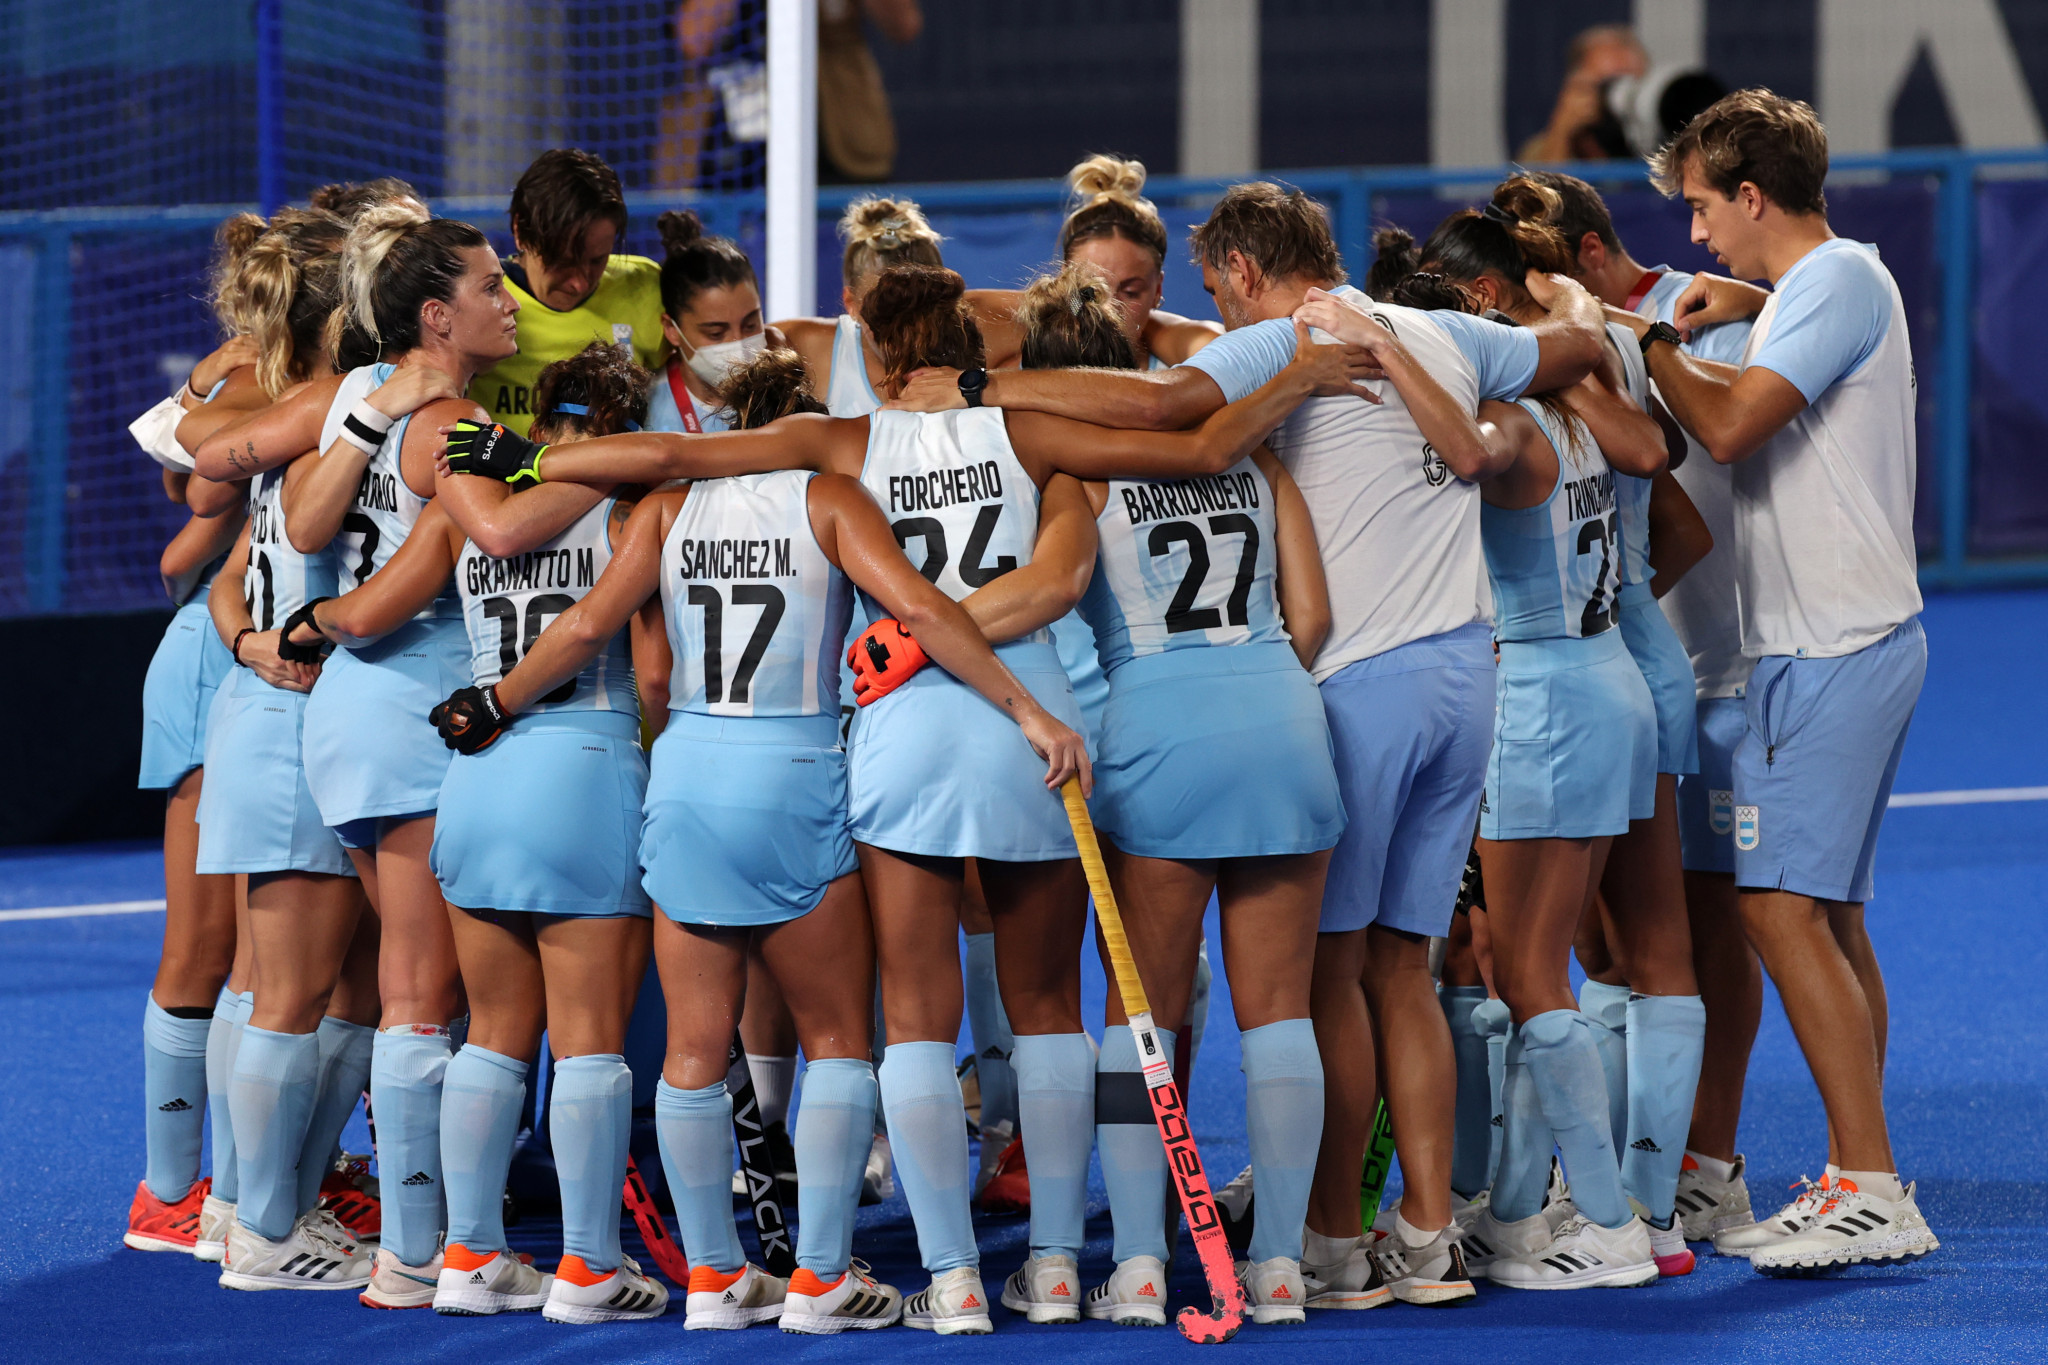 Spain and Argentina win second matches of hockey Pro League double-header